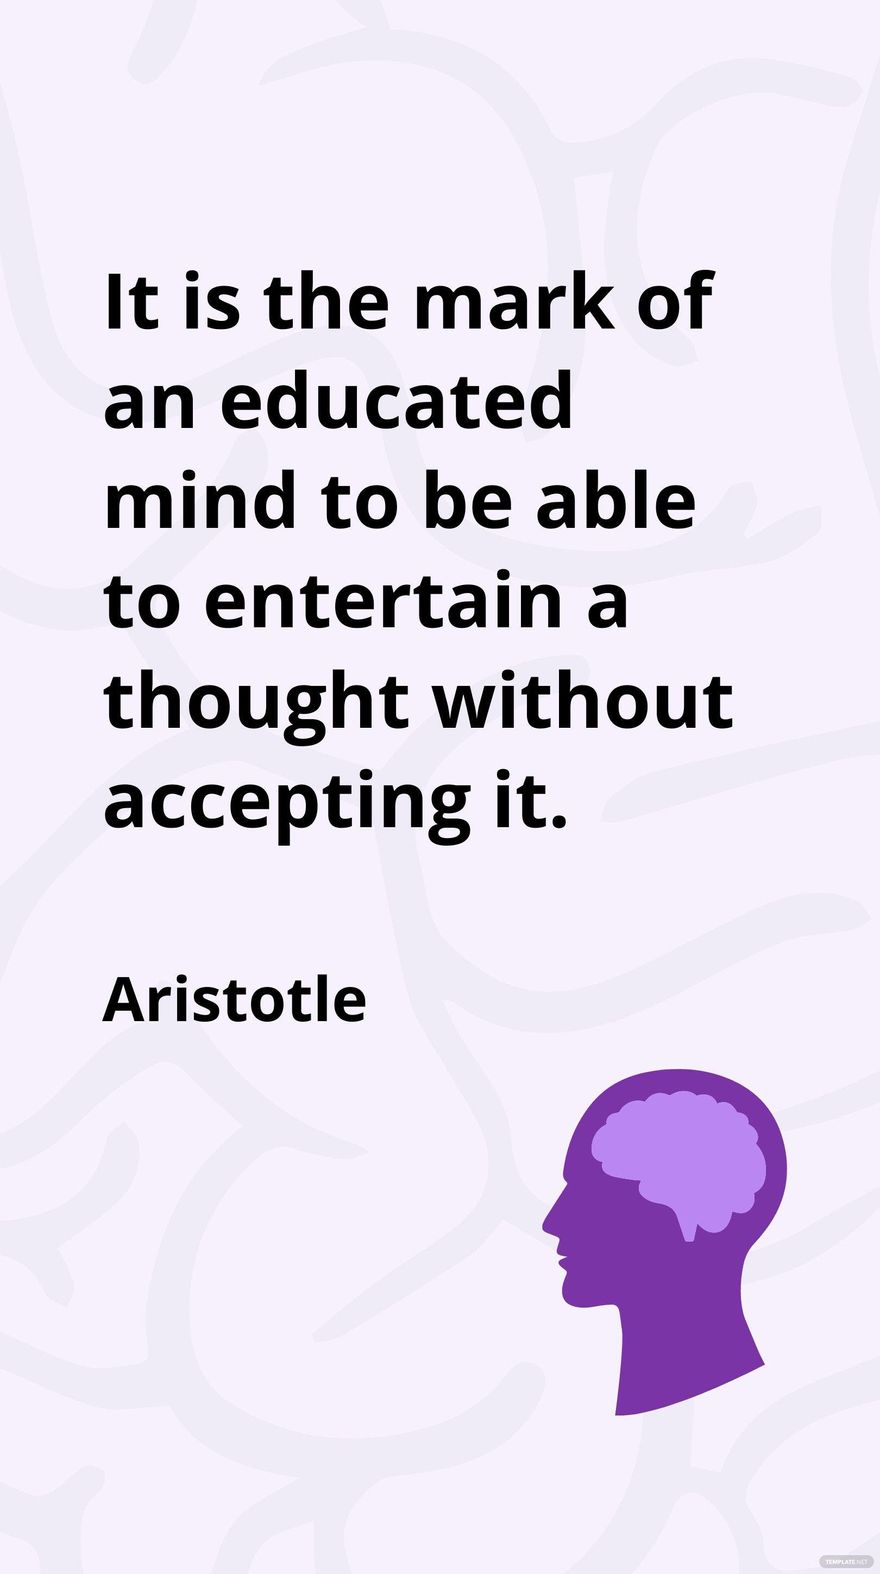 Free Aristotle -It is the mark of an educated mind to be able to entertain a thought without accepting it. in JPG